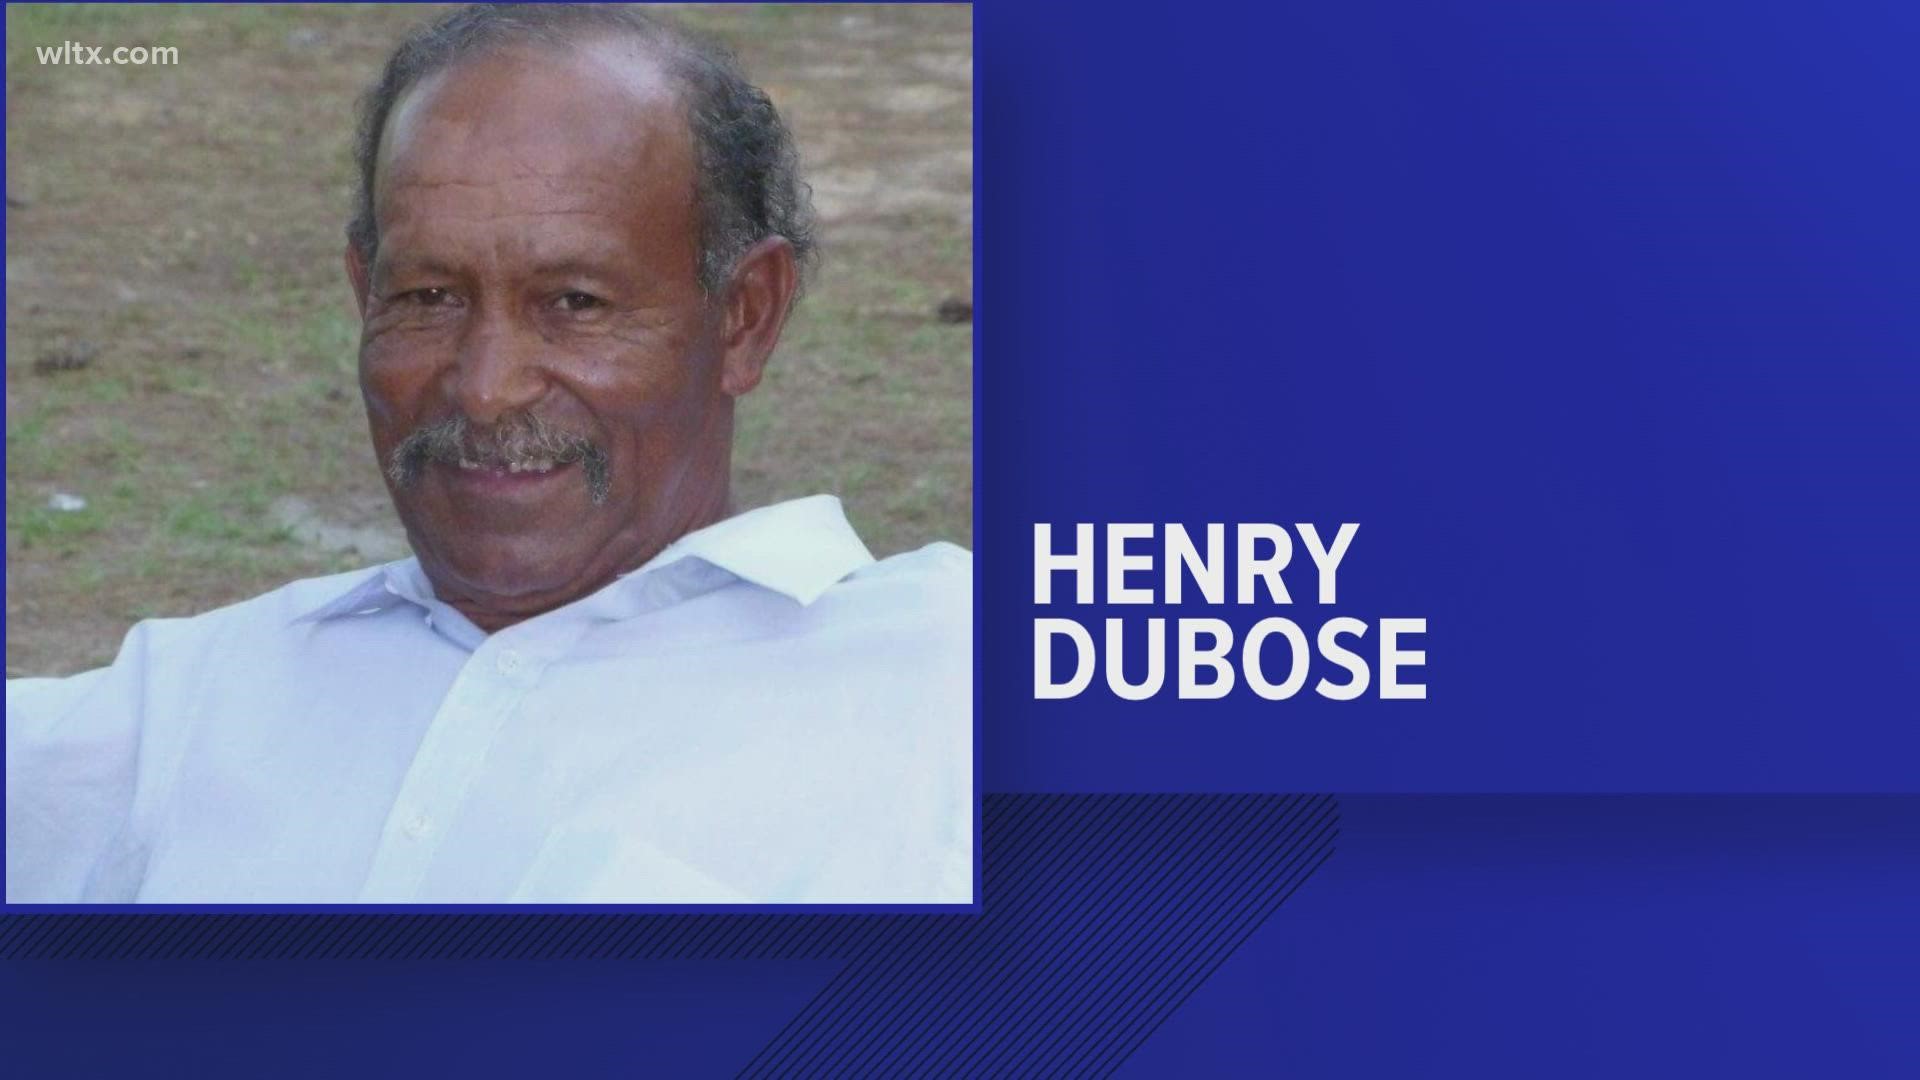 Deputies say they are searching for Henry Dubose along Milford Plantation Road in Pinewood with K-9s and a drone.